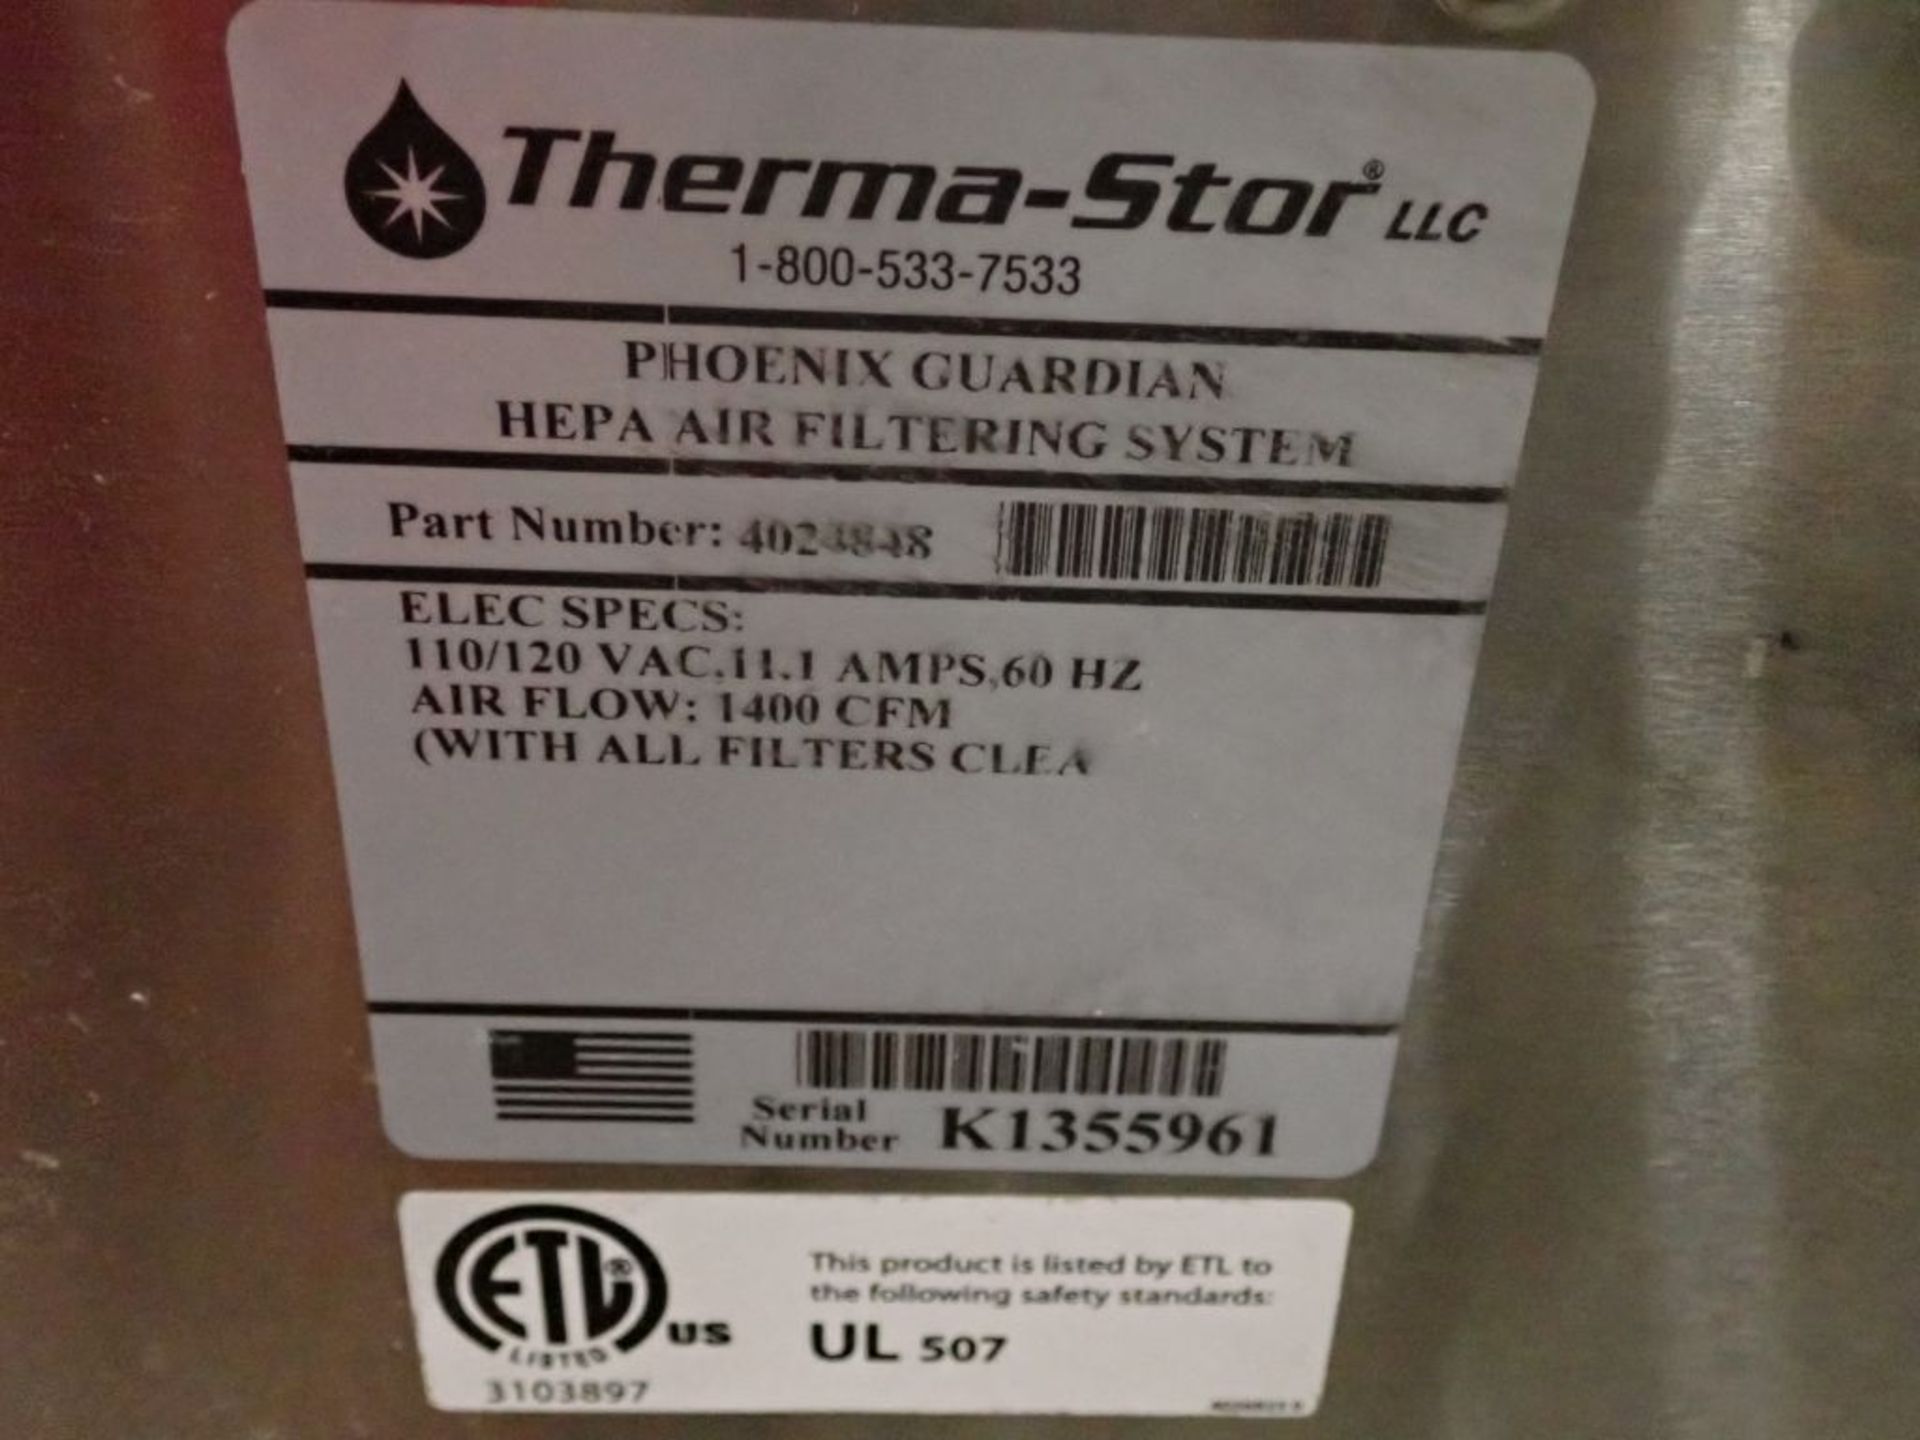 Therma Stor Phoenix Guardian Hepa Air Filtering System - Image 7 of 7